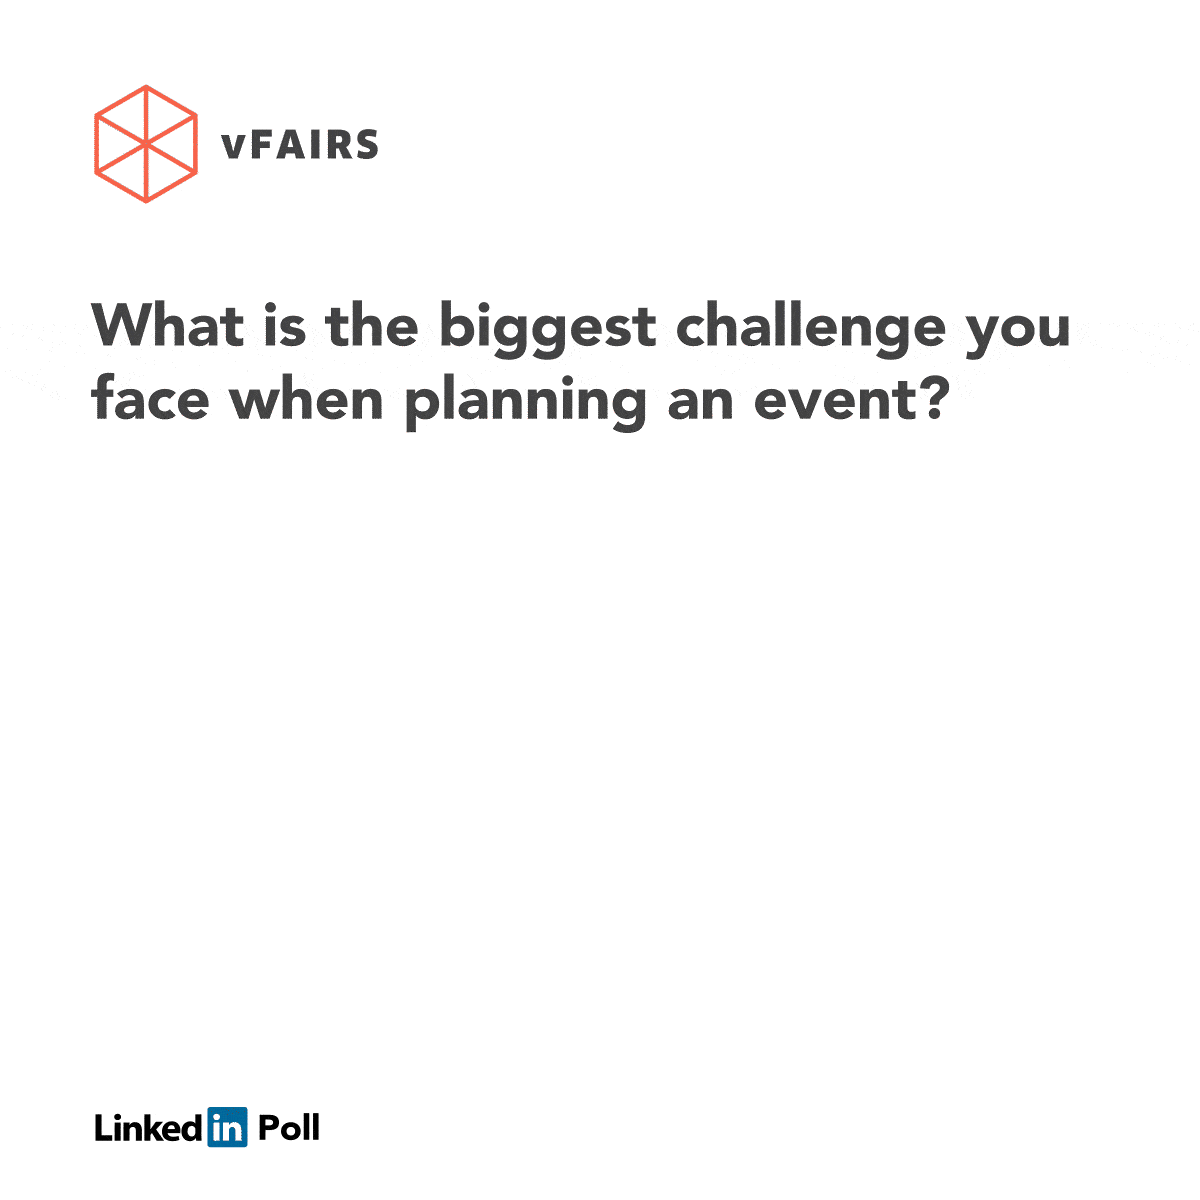 Linkedin poll on challenges when planning an event